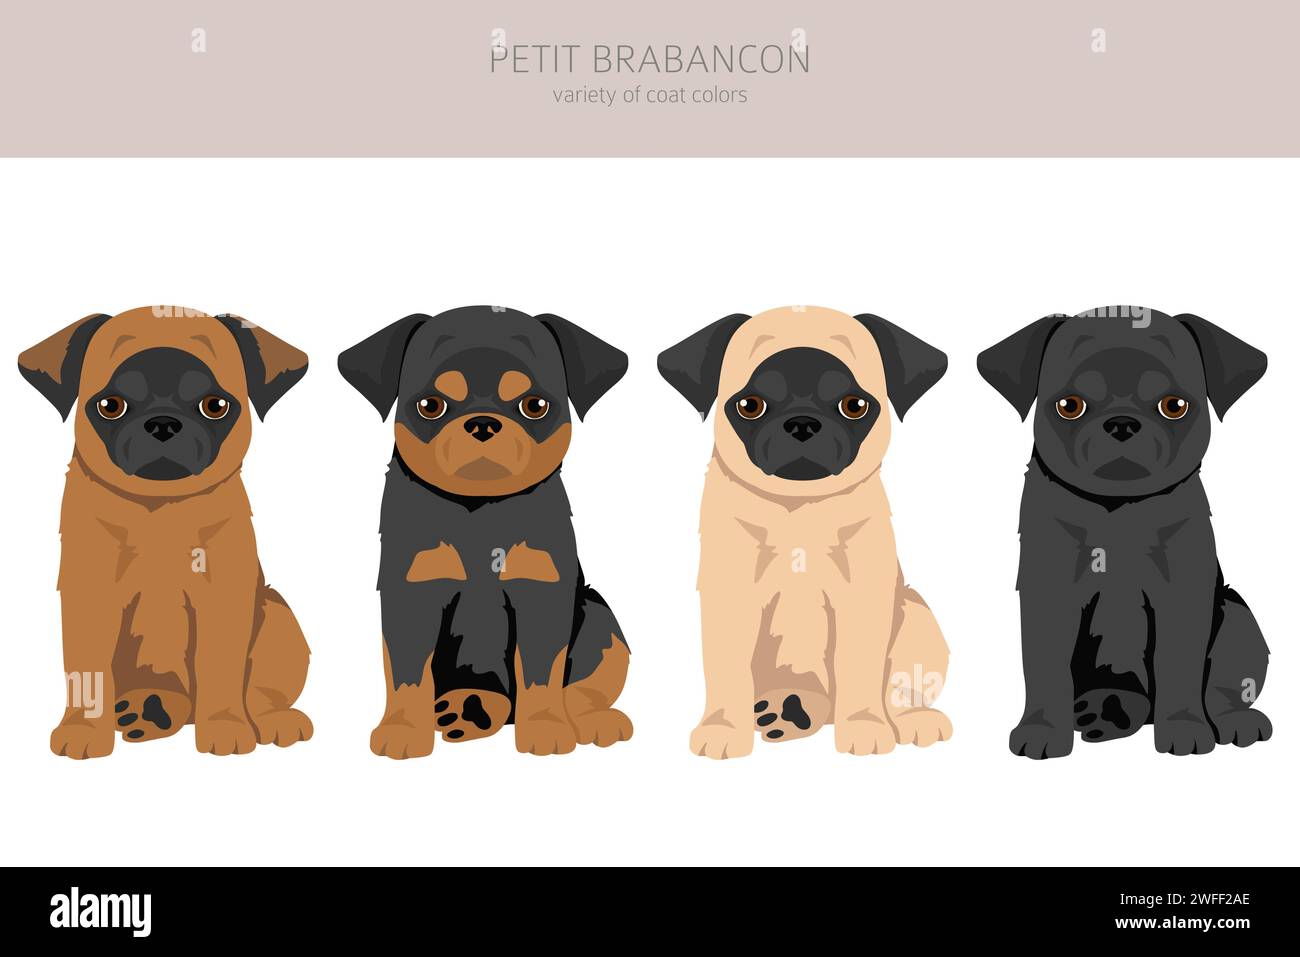 Petit Brabancon puppy, Small Belgian dogs clipart. Different poses, coat colors set.  Vector illustration Stock Vector